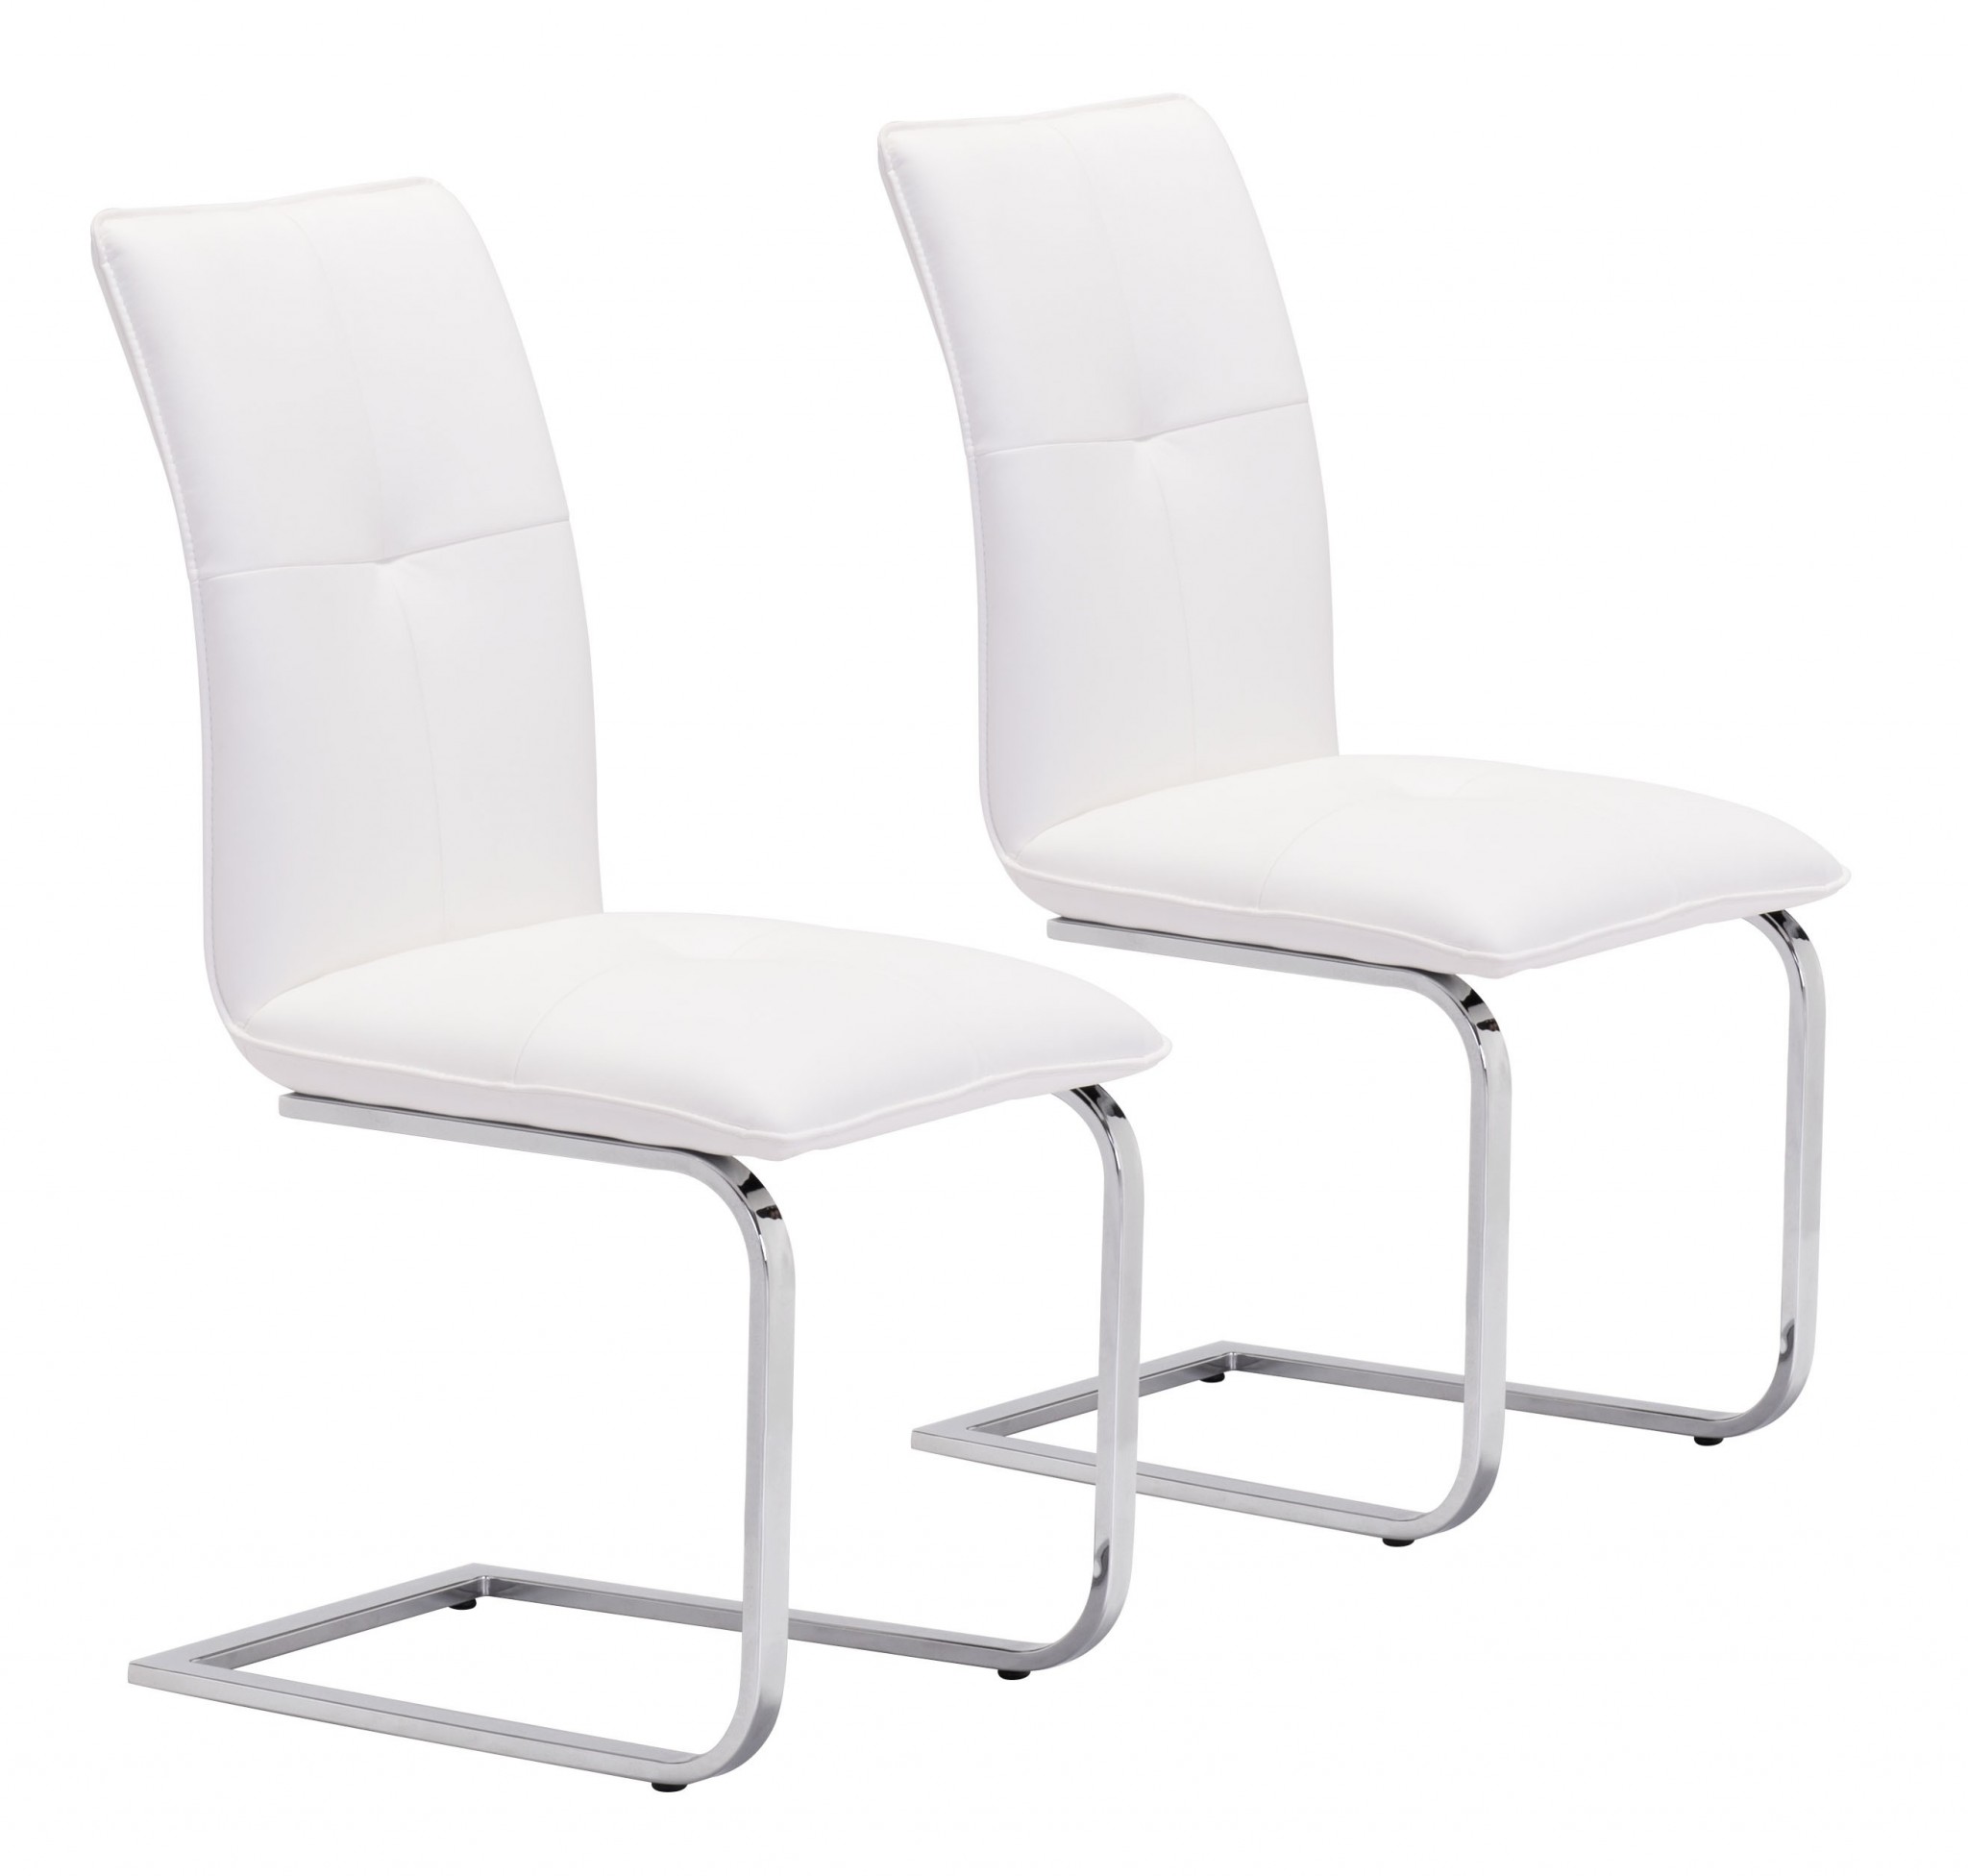 Set of Two White Faux Leather and Chrome Contempo Comfy Dining Chairs